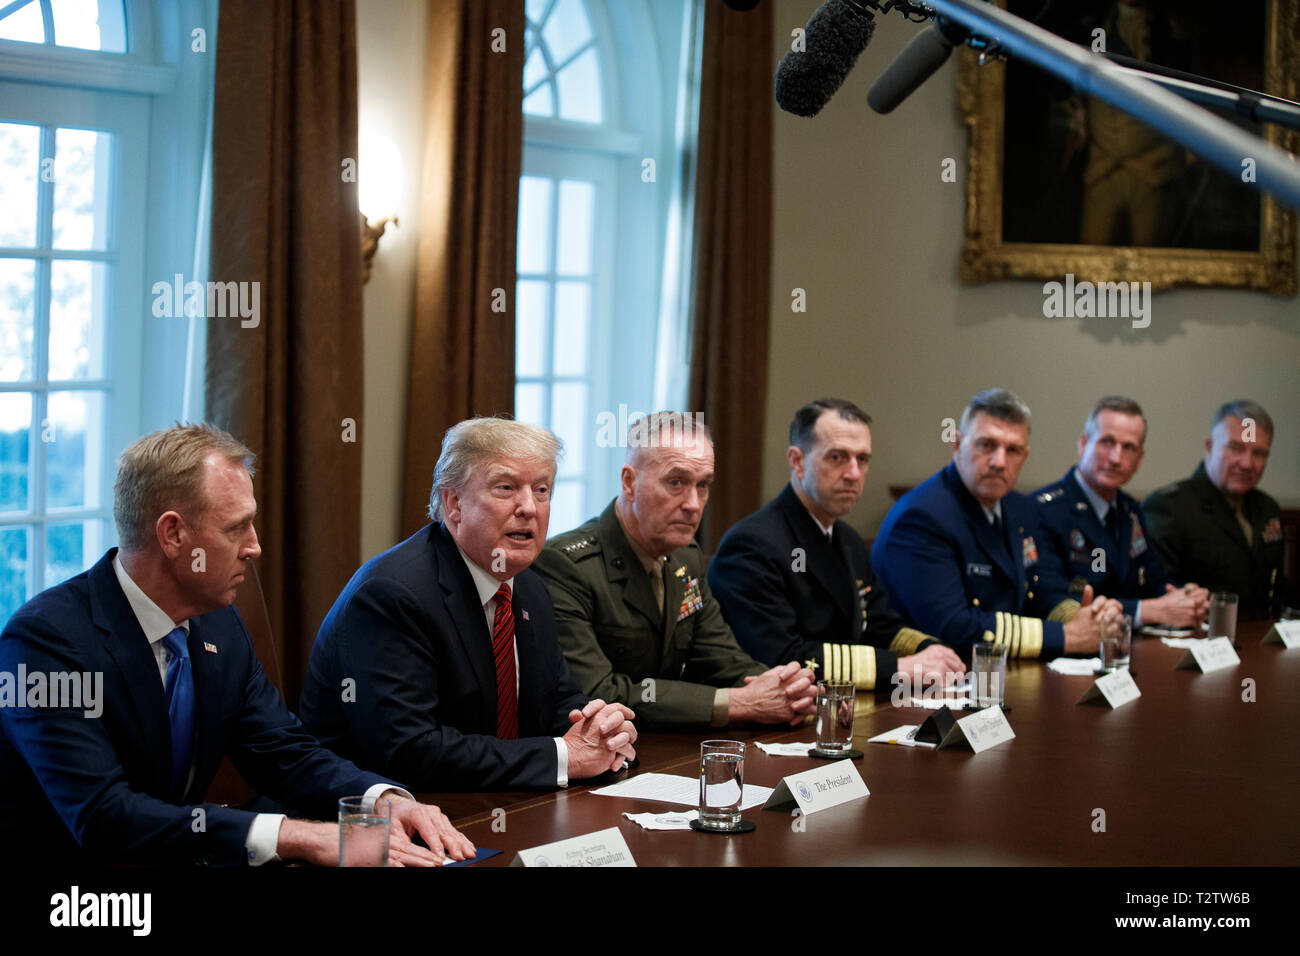 US President Donald J. Trump (L-2), with Acting Secretary of Defense Patrick Shanahan (L) and Chairman of the Joint Chiefs of Staff General Joseph Dunford (L-3), delivers remarks during a briefing by senior military leaders in the Cabinet Room of the White House in Washington, DC, USA, 03 April 2019. Following the briefing President Trump will host a dinner for the officials. Credit: Shawn Thew/Pool via CNP /MediaPunch Stock Photo